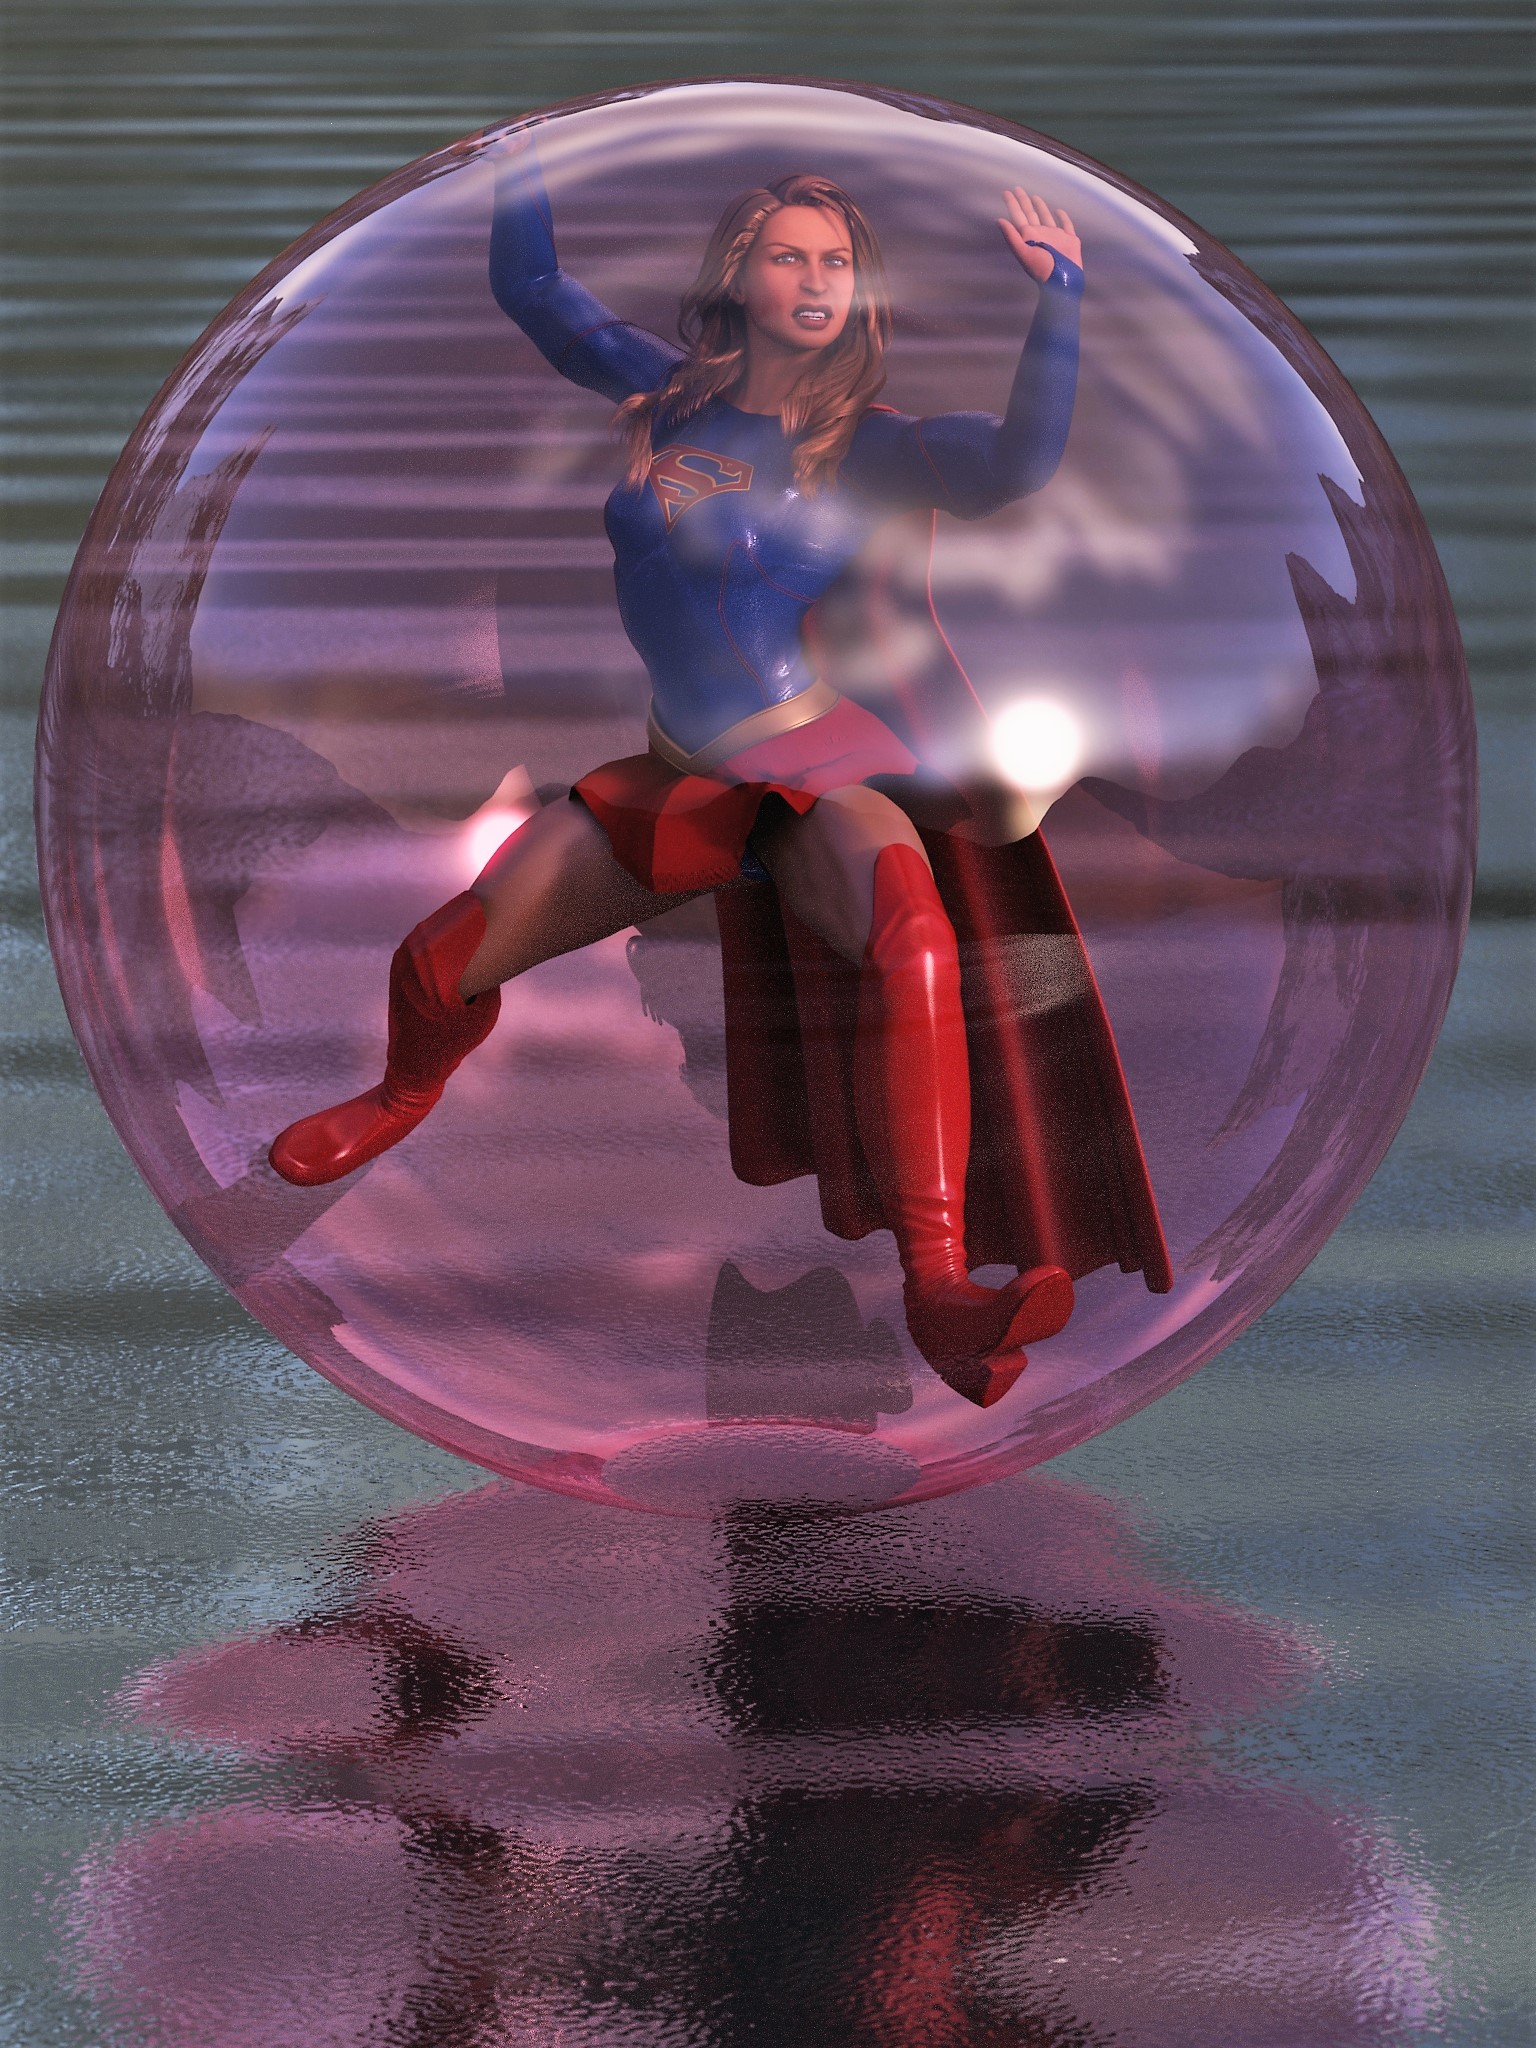 Tribute this bubble round lady